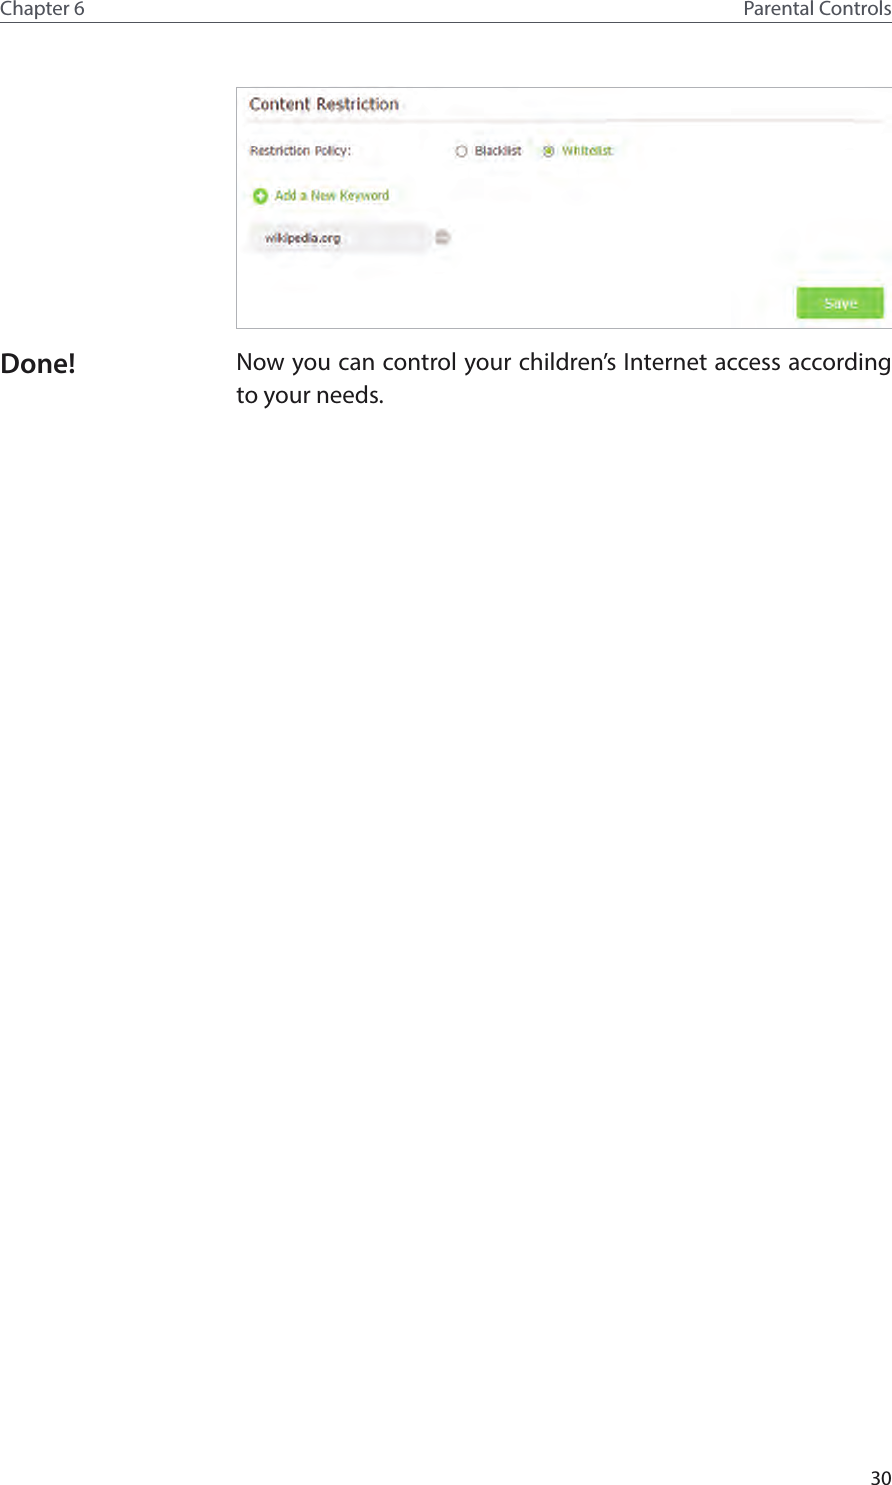 30Chapter 6 Parental ControlsNow you can control your children’s Internet access according to your needs.Done!